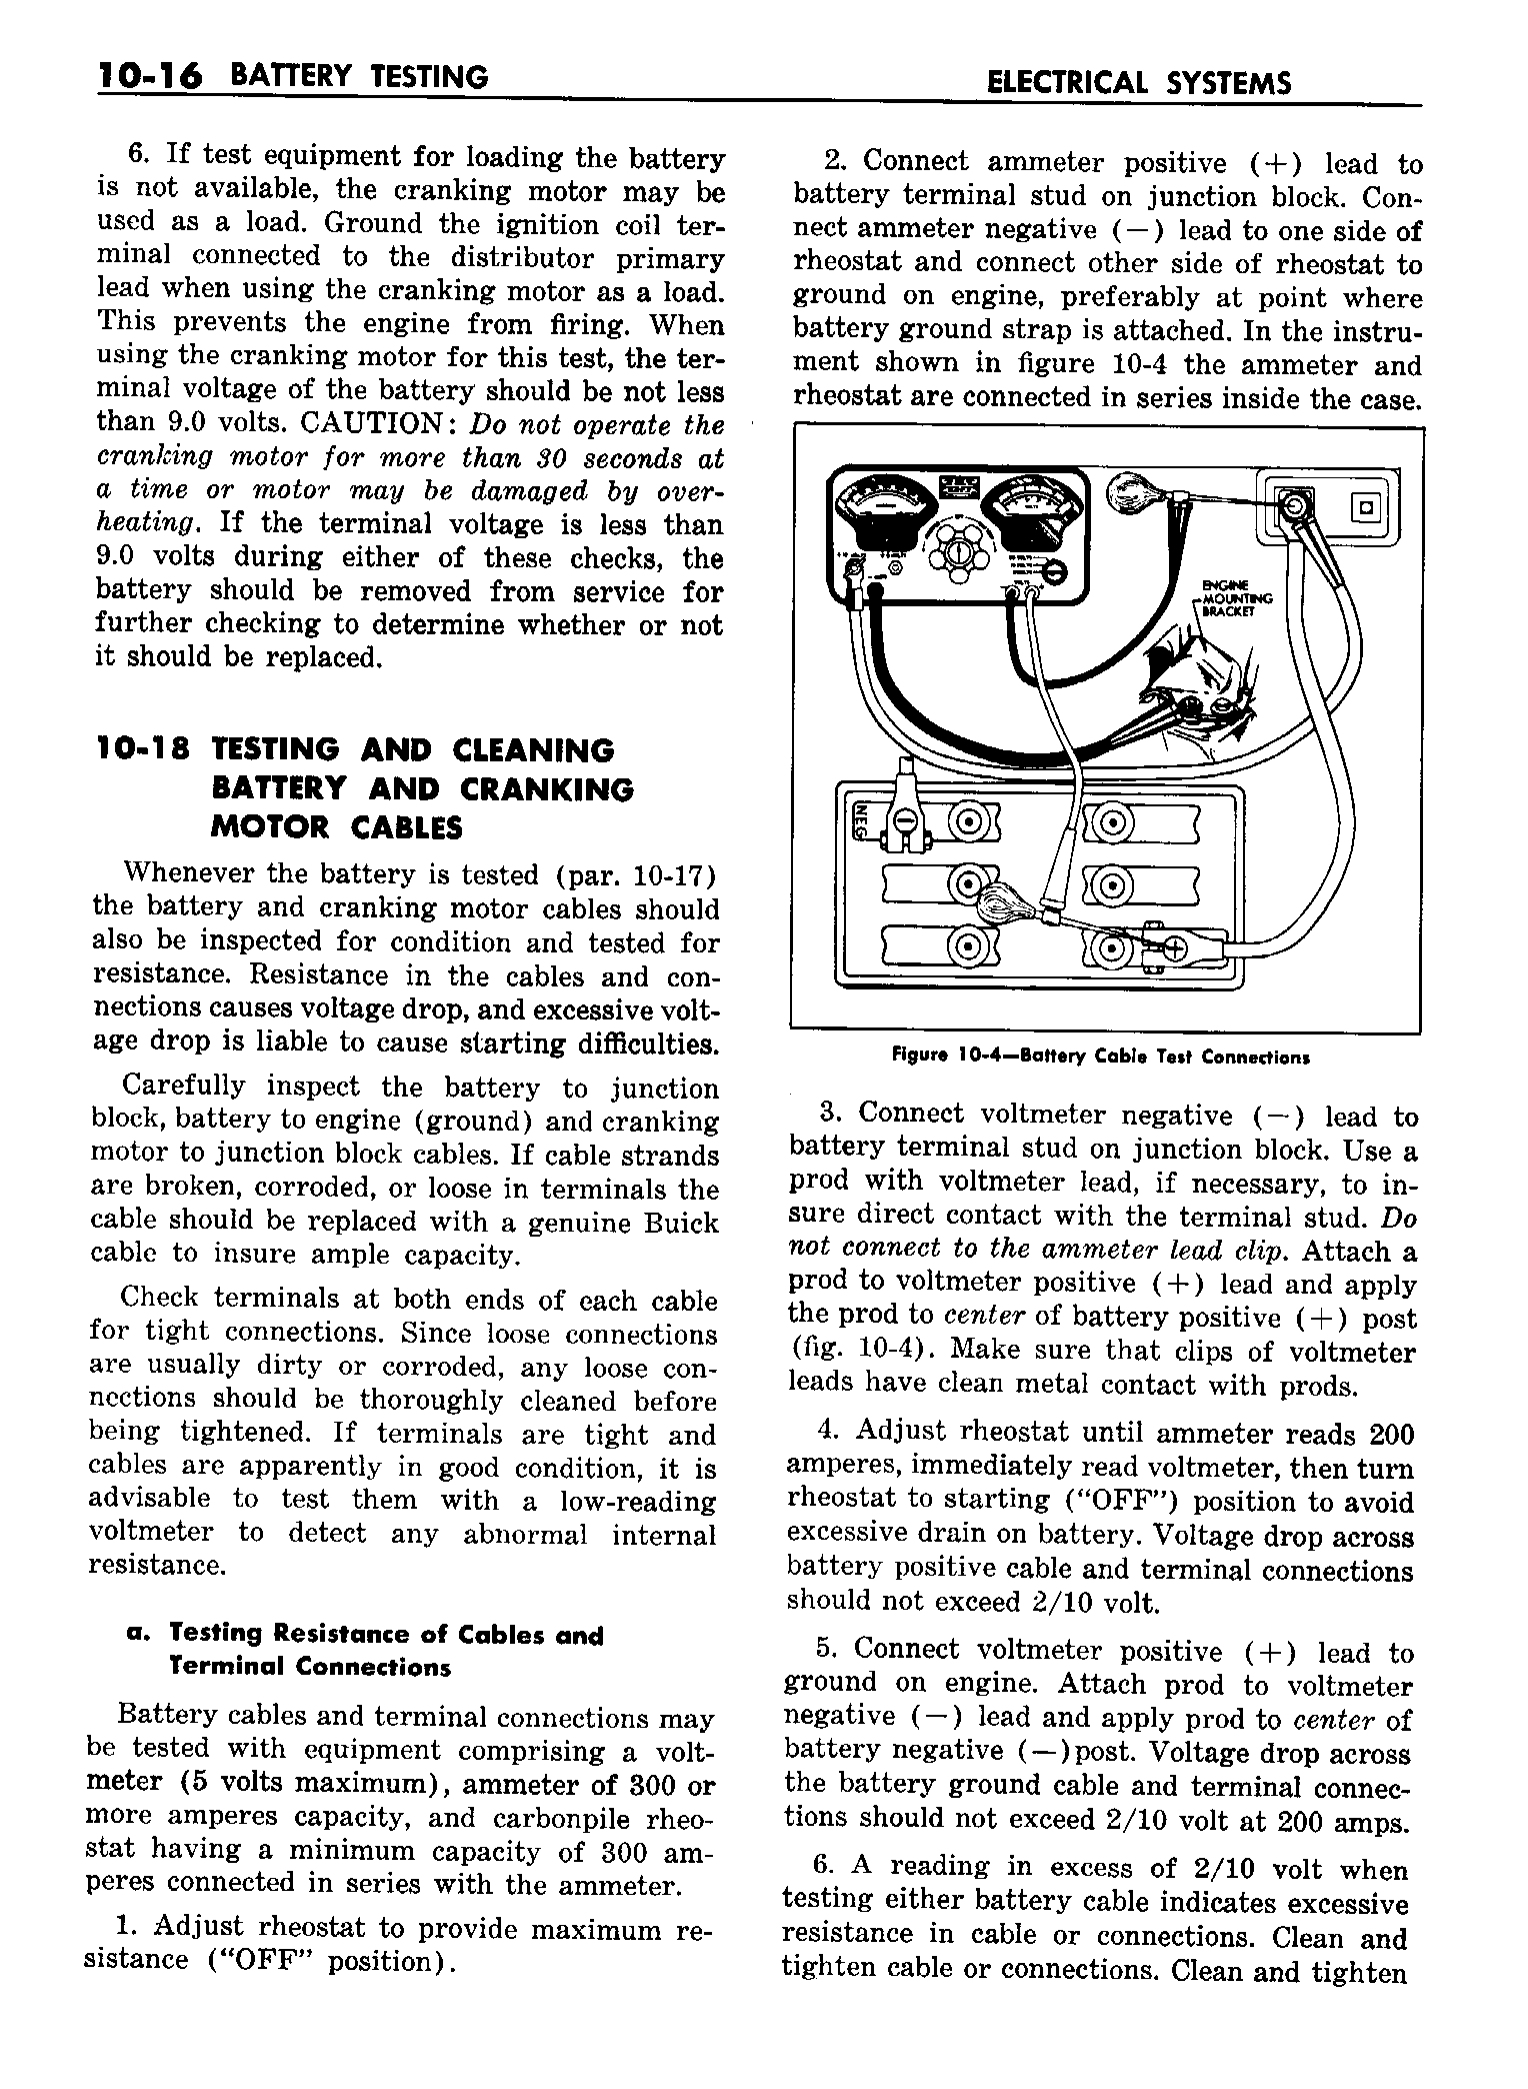 n_11 1958 Buick Shop Manual - Electrical Systems_16.jpg